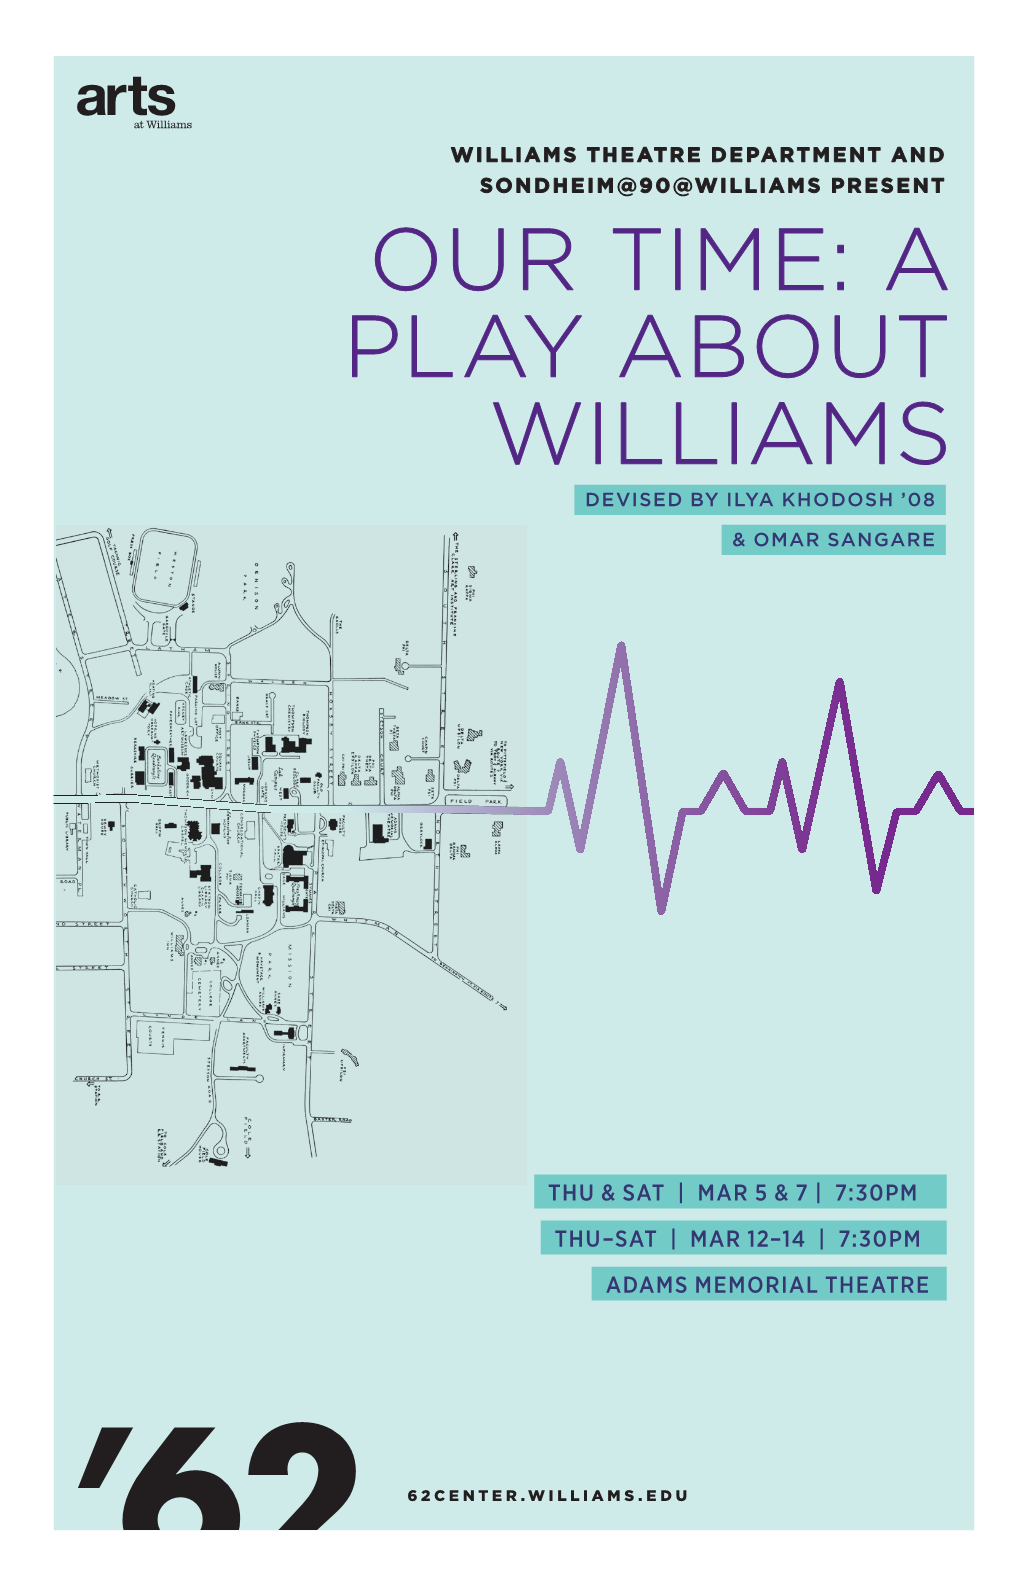 Our Time: a Play About Williams Devised by Ilya Khodosh ’08